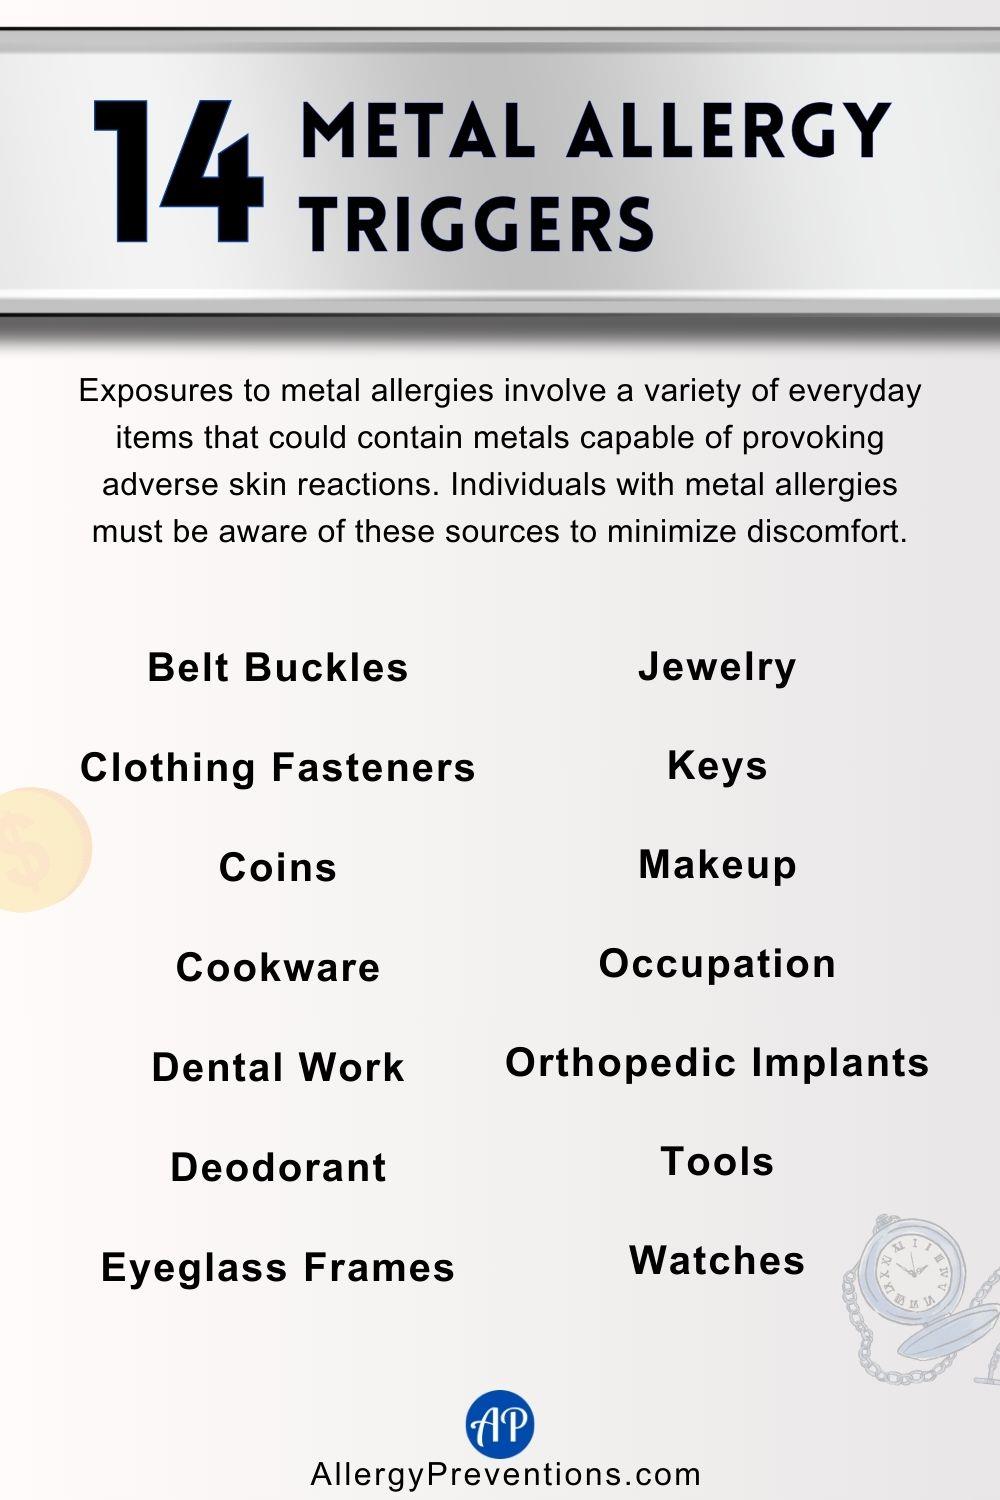 metal allergy triggers infographic. Exposures to metal allergies involve a variety of everyday items that could contain metals capable of provoking adverse skin reactions. Individuals with metal allergies must be aware of these sources to minimize discomfort. Metal allergy potential triggers list: Belt Buckles, Clothing Fasteners, Coins, Cookware, Dental Work, Deodorant, Eyeglass Frames, Jewelry, Keys, Makeup, Occupation, Orthopedic Implants, Tools, and Watches.